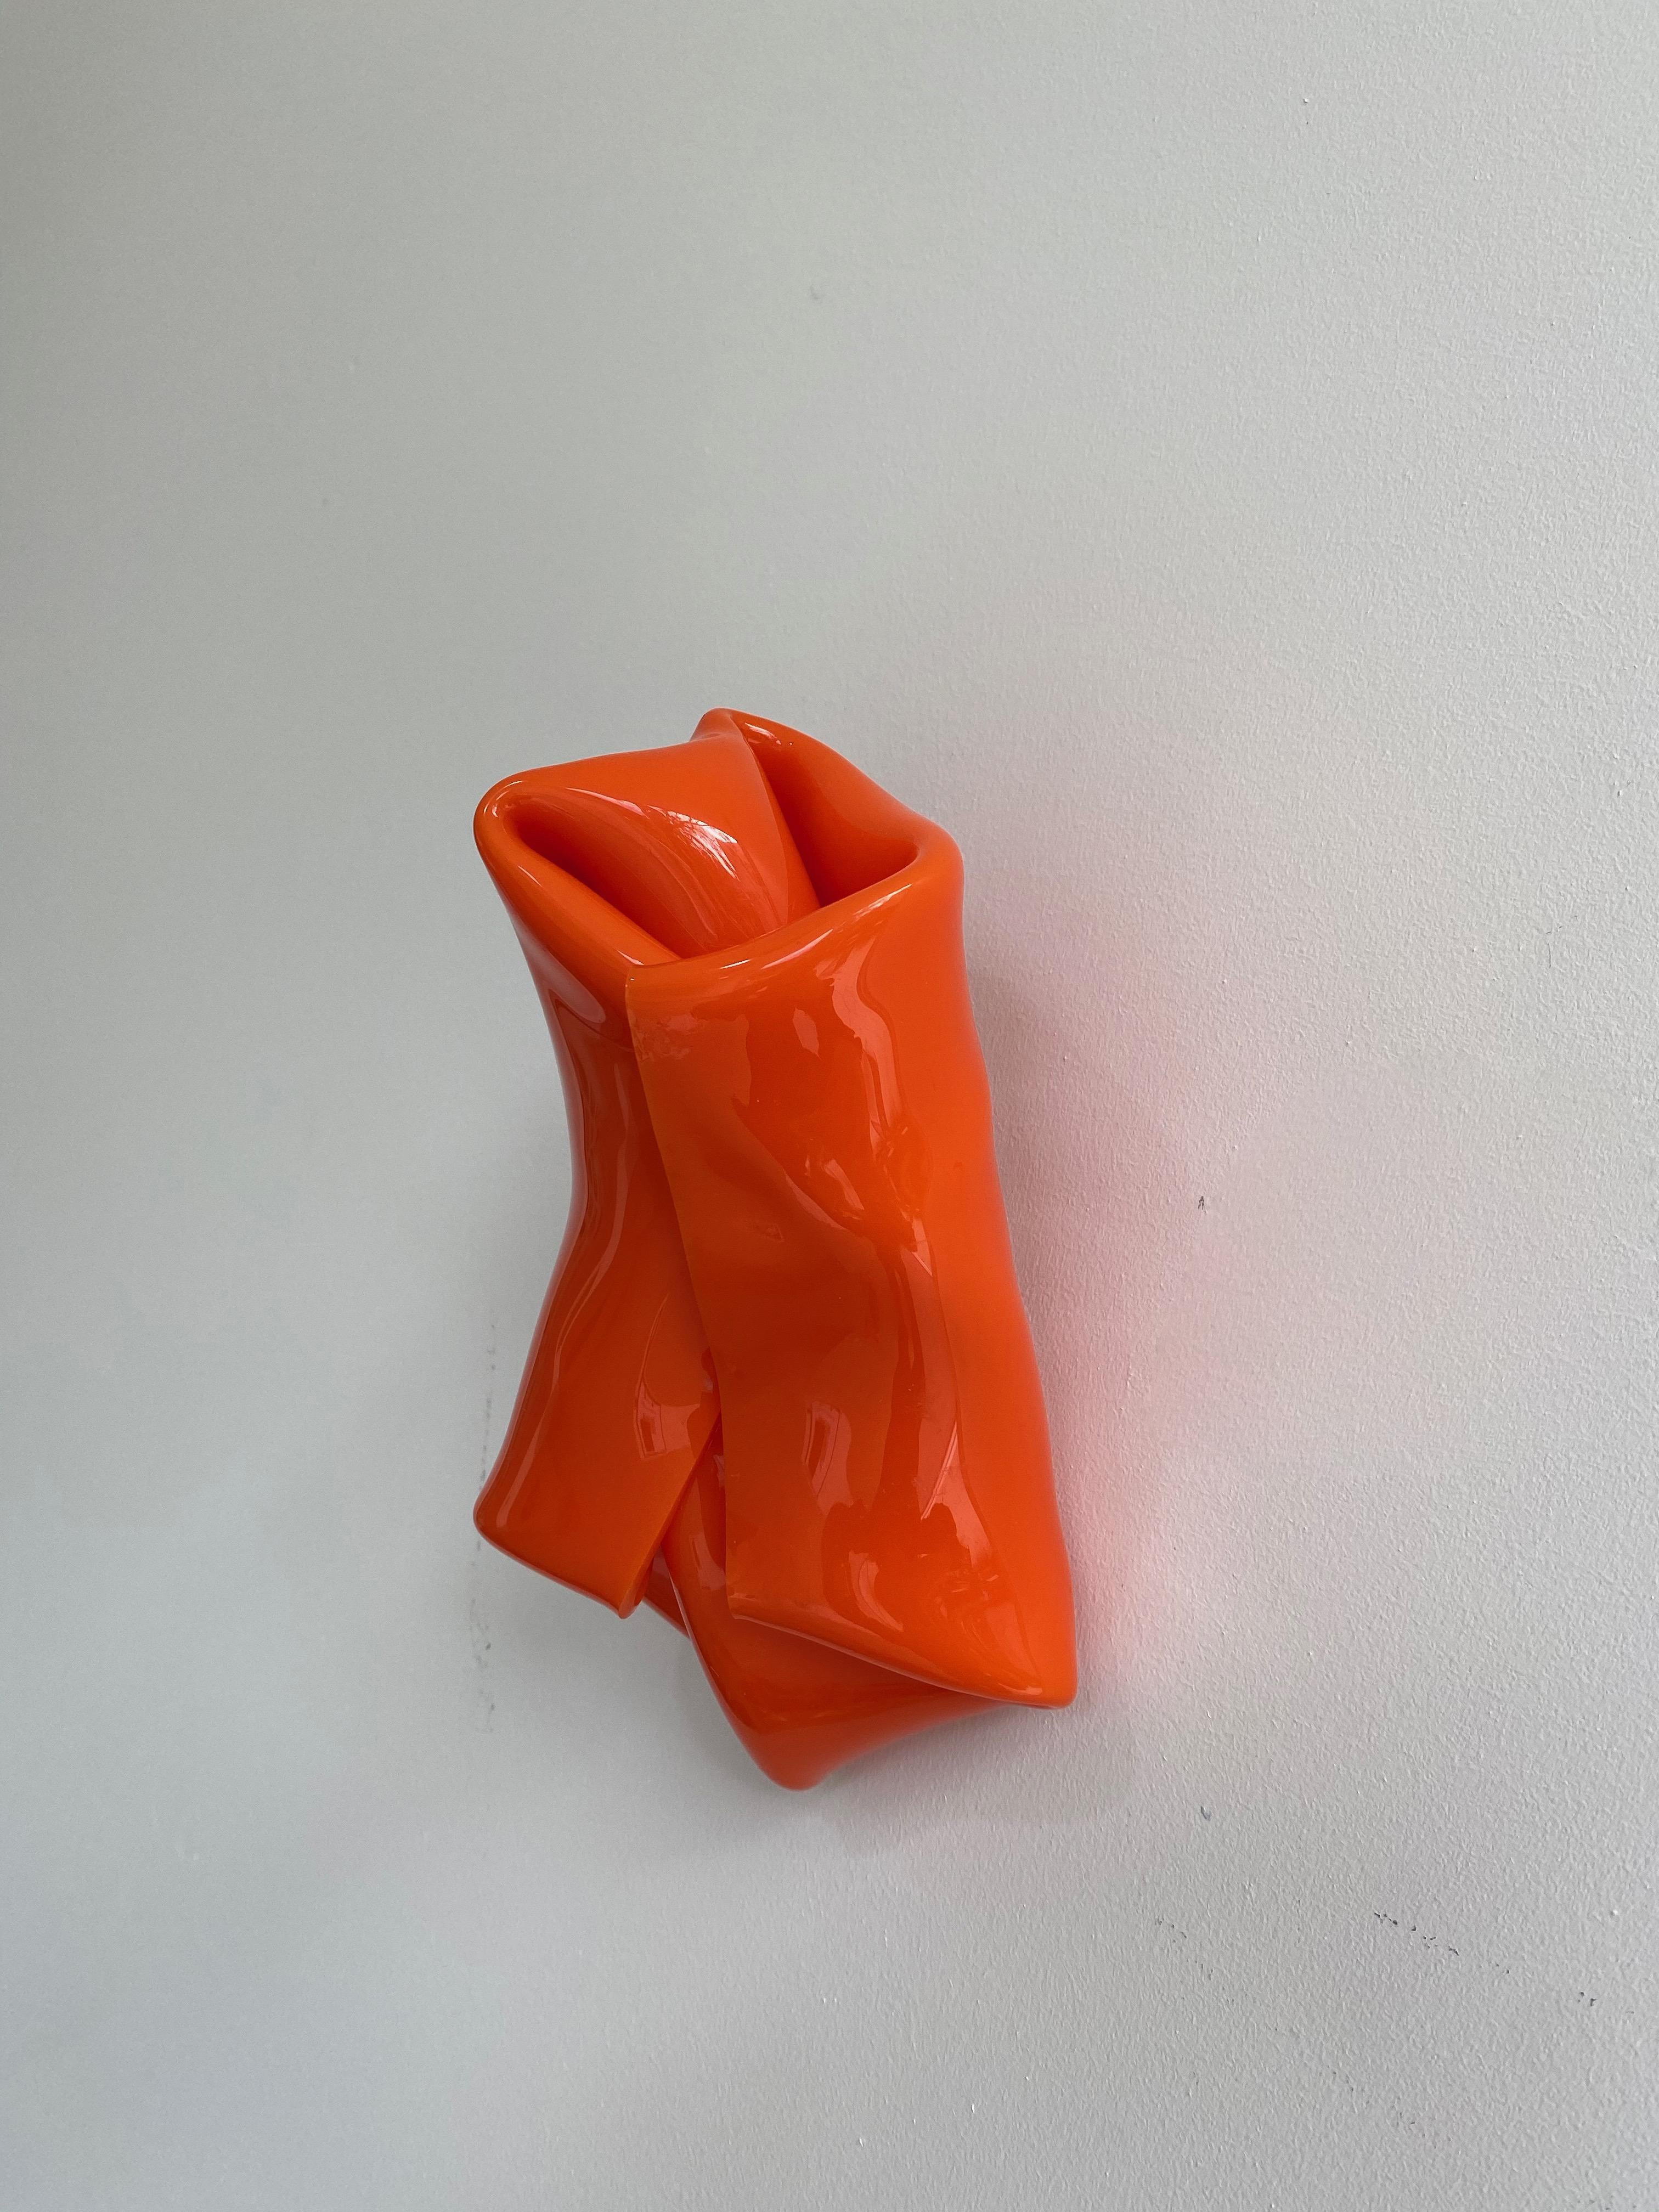 'Small Orange Parcel', Bright, colourful contemporary abstract sculpture